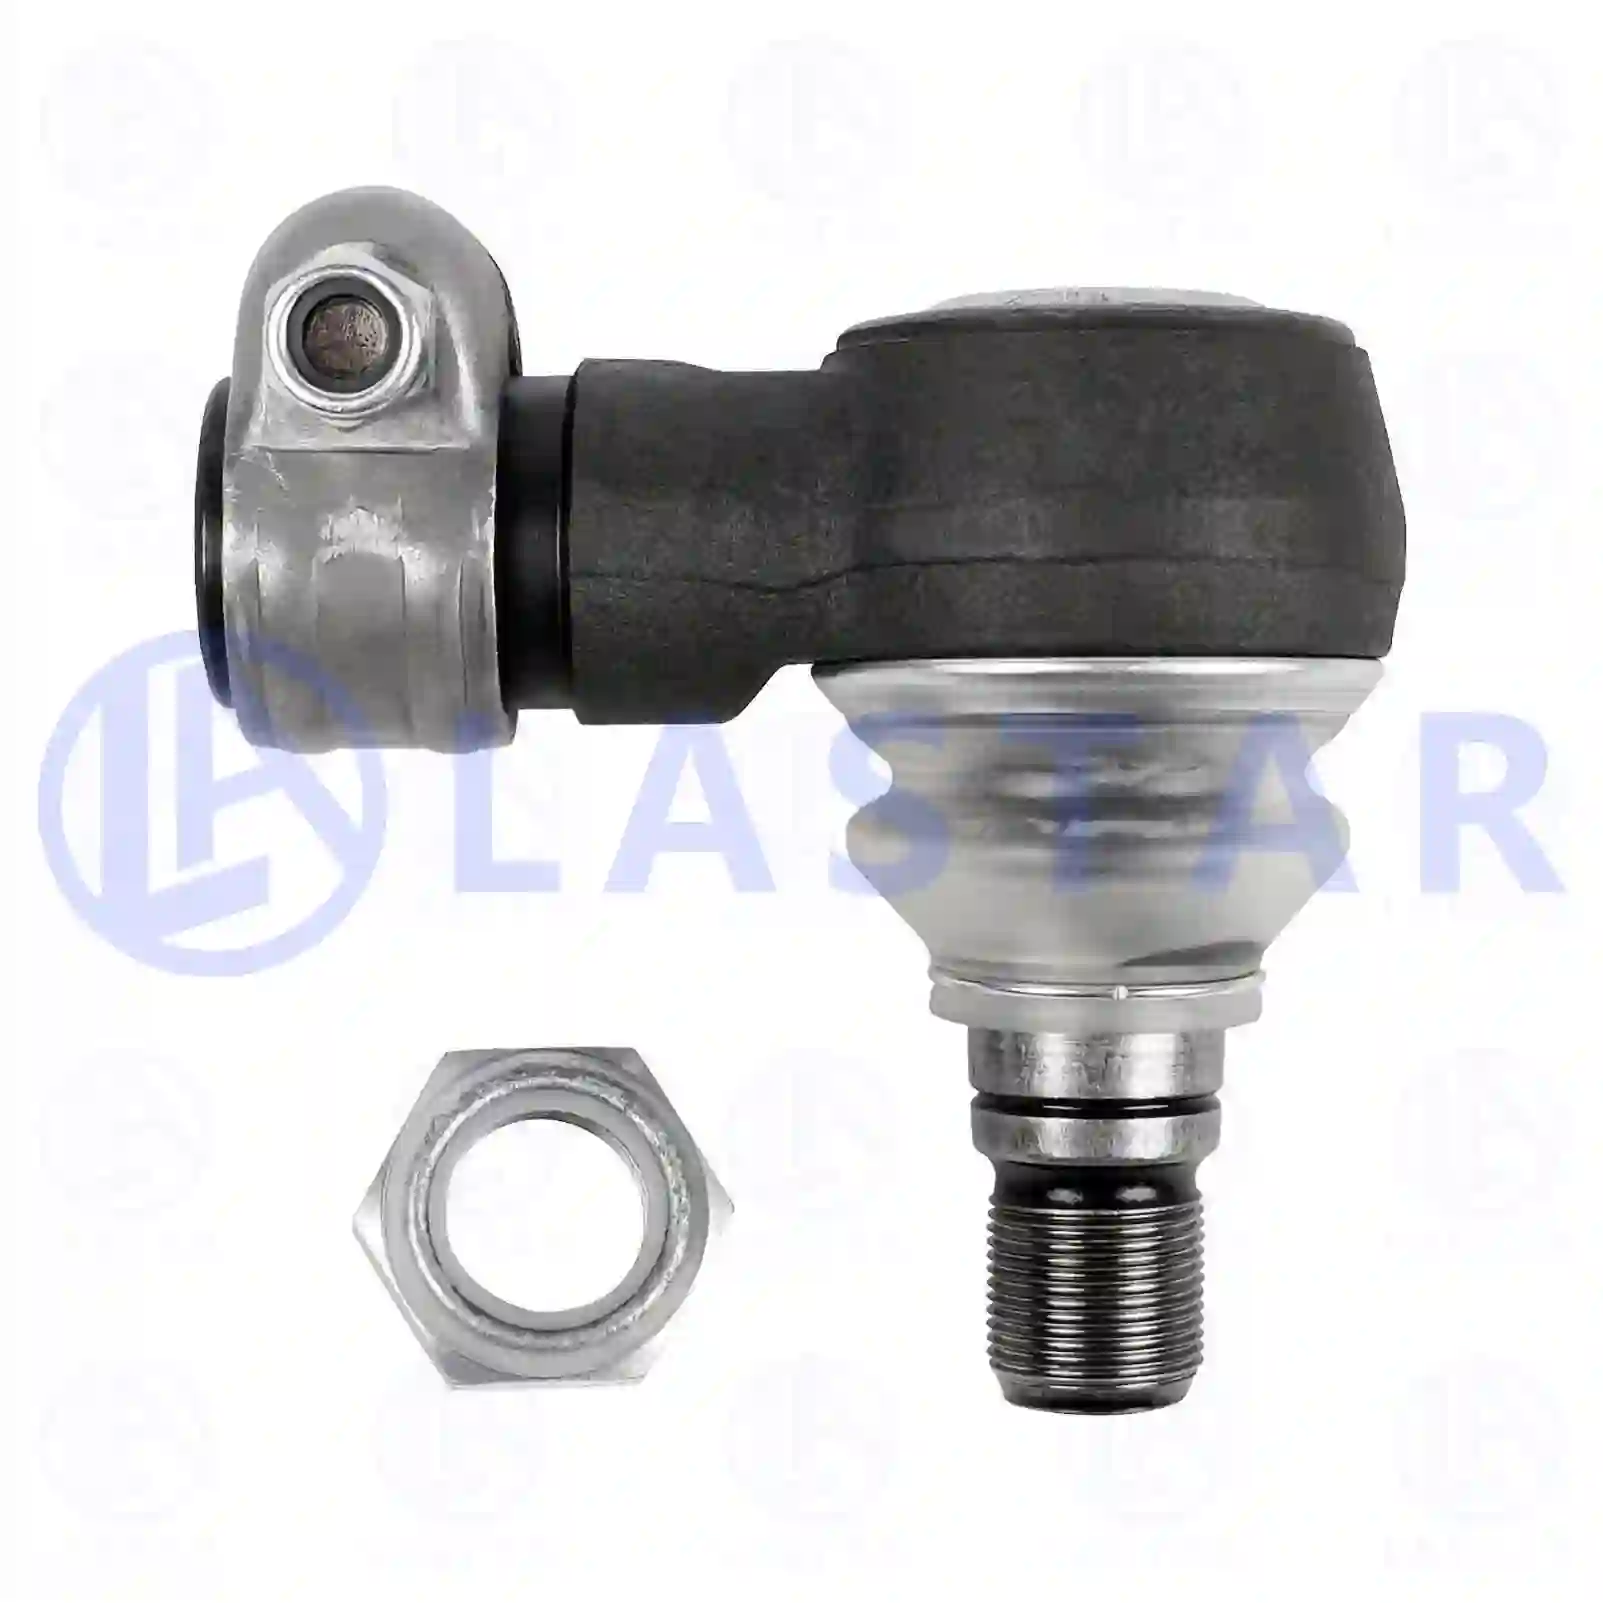 Ball joint, right hand thread, 77705667, 0273203, 1399724, 273203, 648636, ZG40401-0008 ||  77705667 Lastar Spare Part | Truck Spare Parts, Auotomotive Spare Parts Ball joint, right hand thread, 77705667, 0273203, 1399724, 273203, 648636, ZG40401-0008 ||  77705667 Lastar Spare Part | Truck Spare Parts, Auotomotive Spare Parts